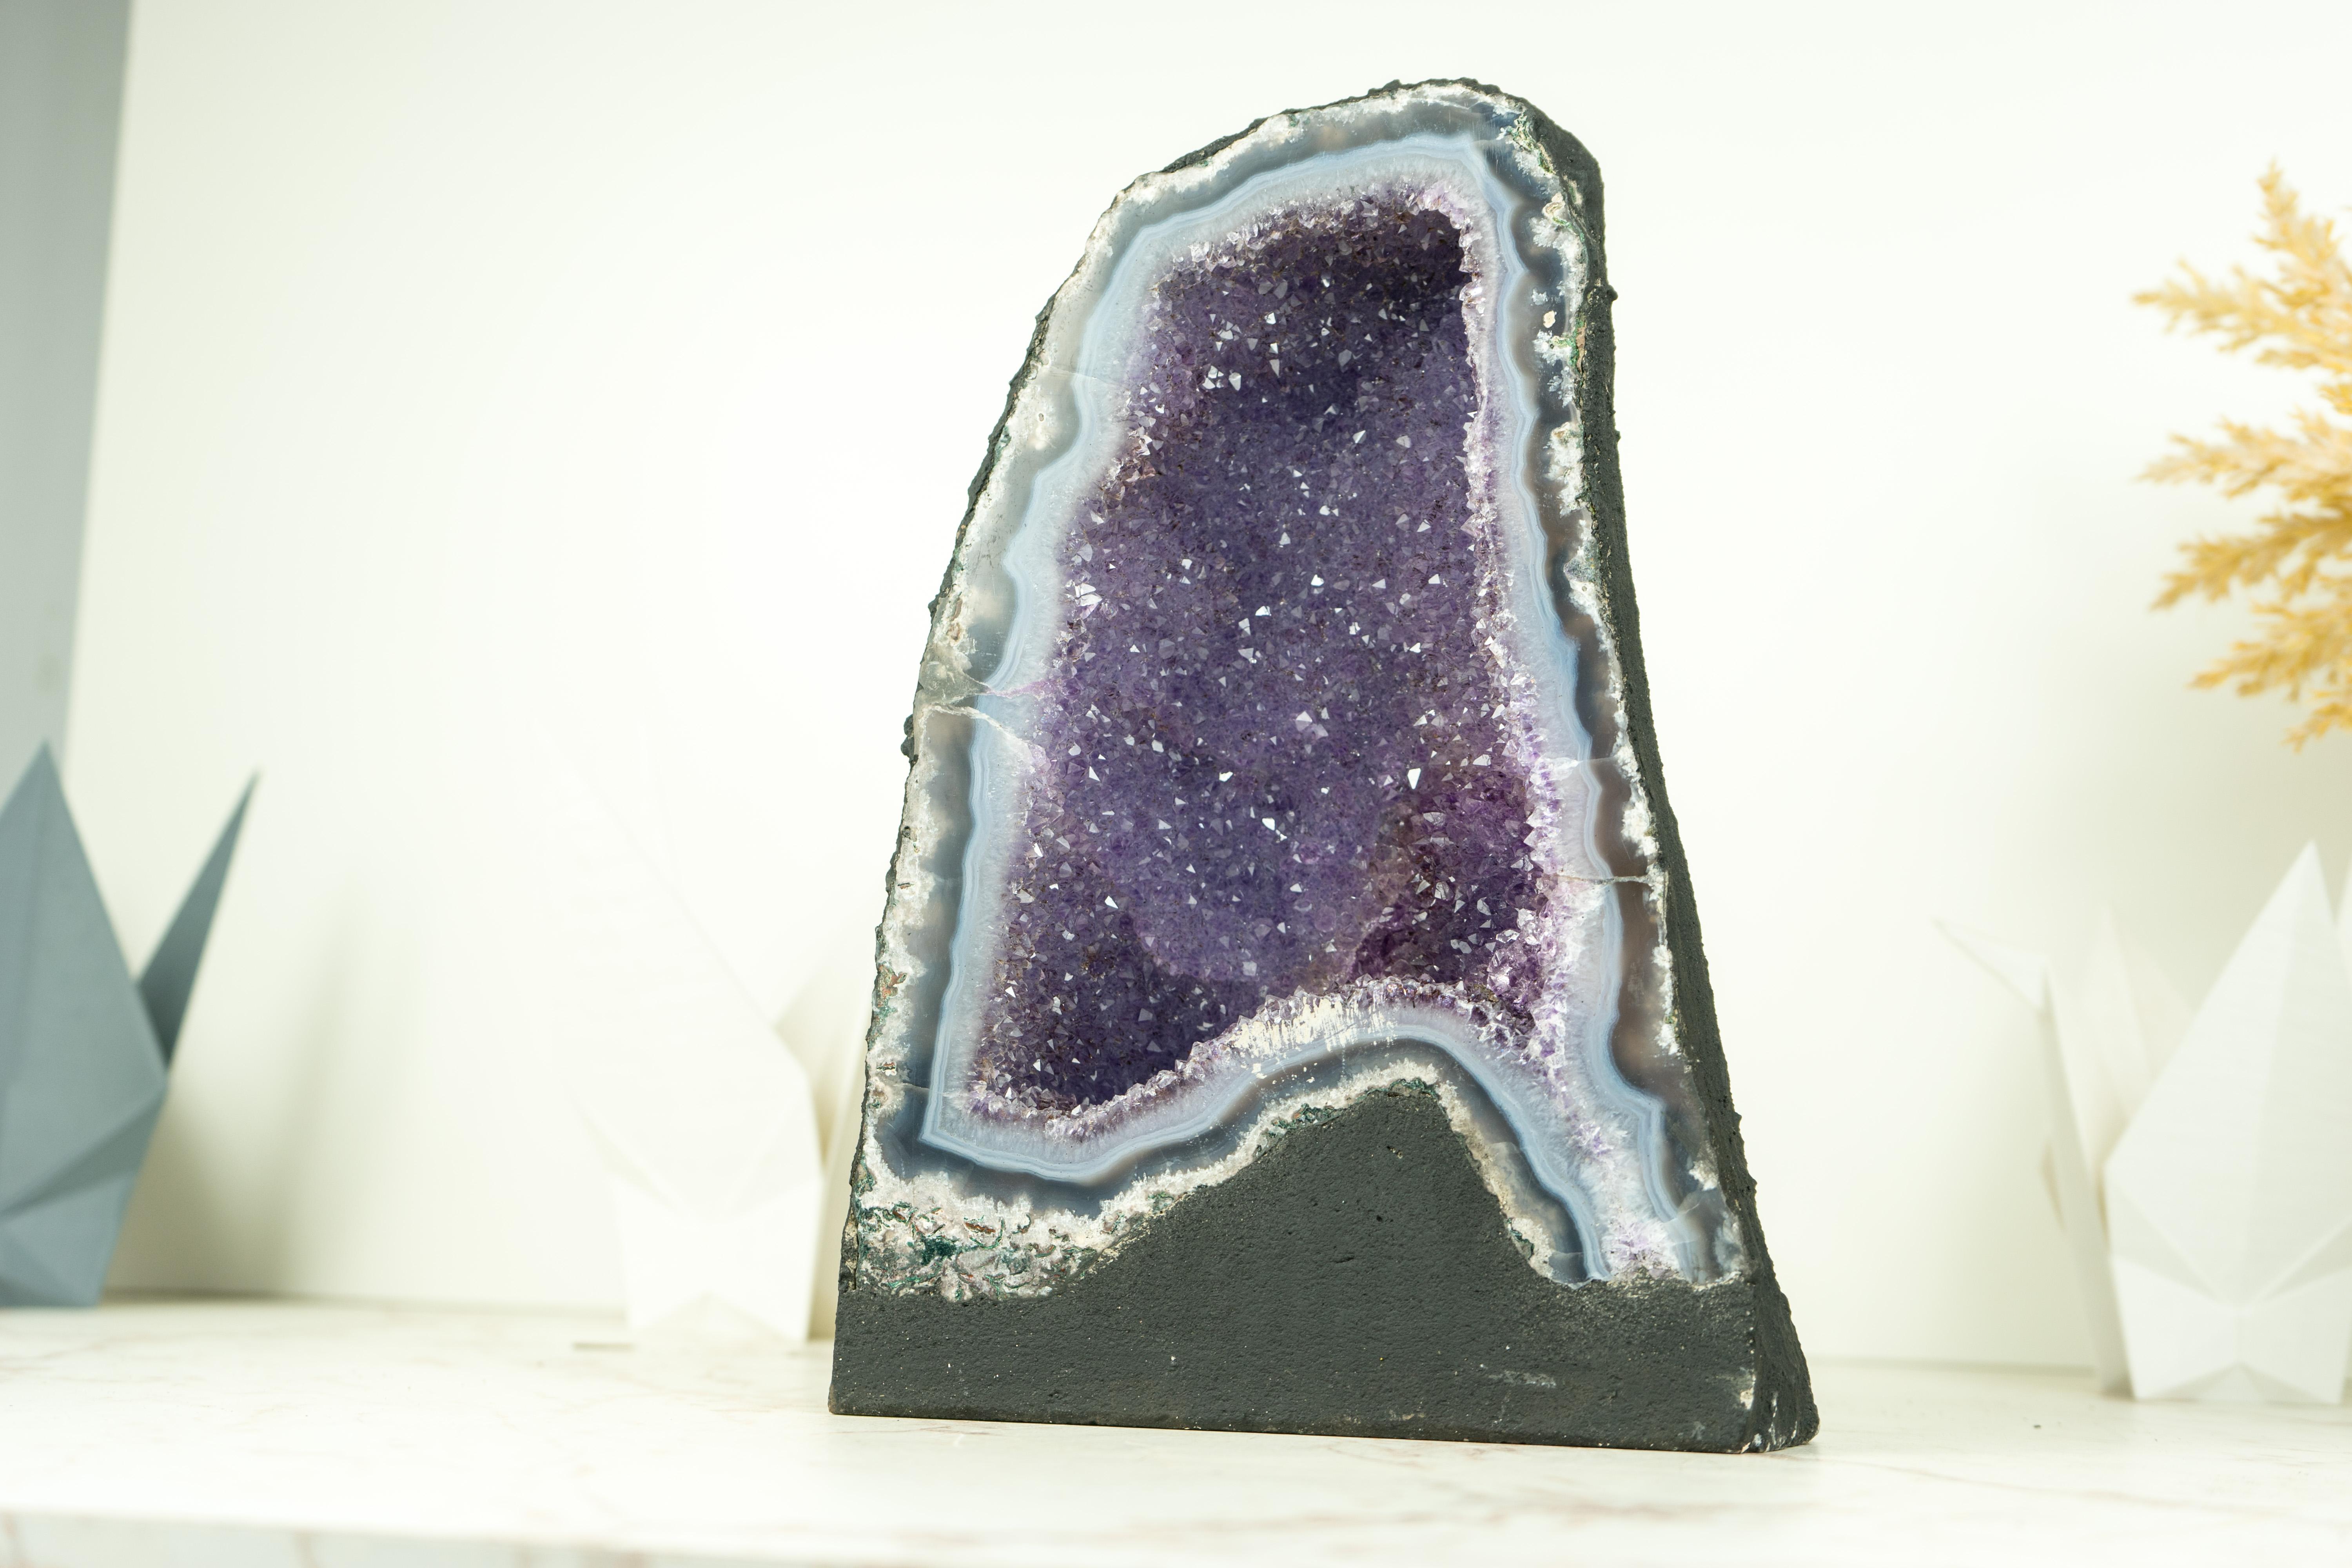 Small in size, this natural Agate Geode brings many rare characteristics which turn it into a natural artwork. Those characteristics, as the blue agate band, the lavender galaxy druzy and the perfection of its natural drawings will shine at your